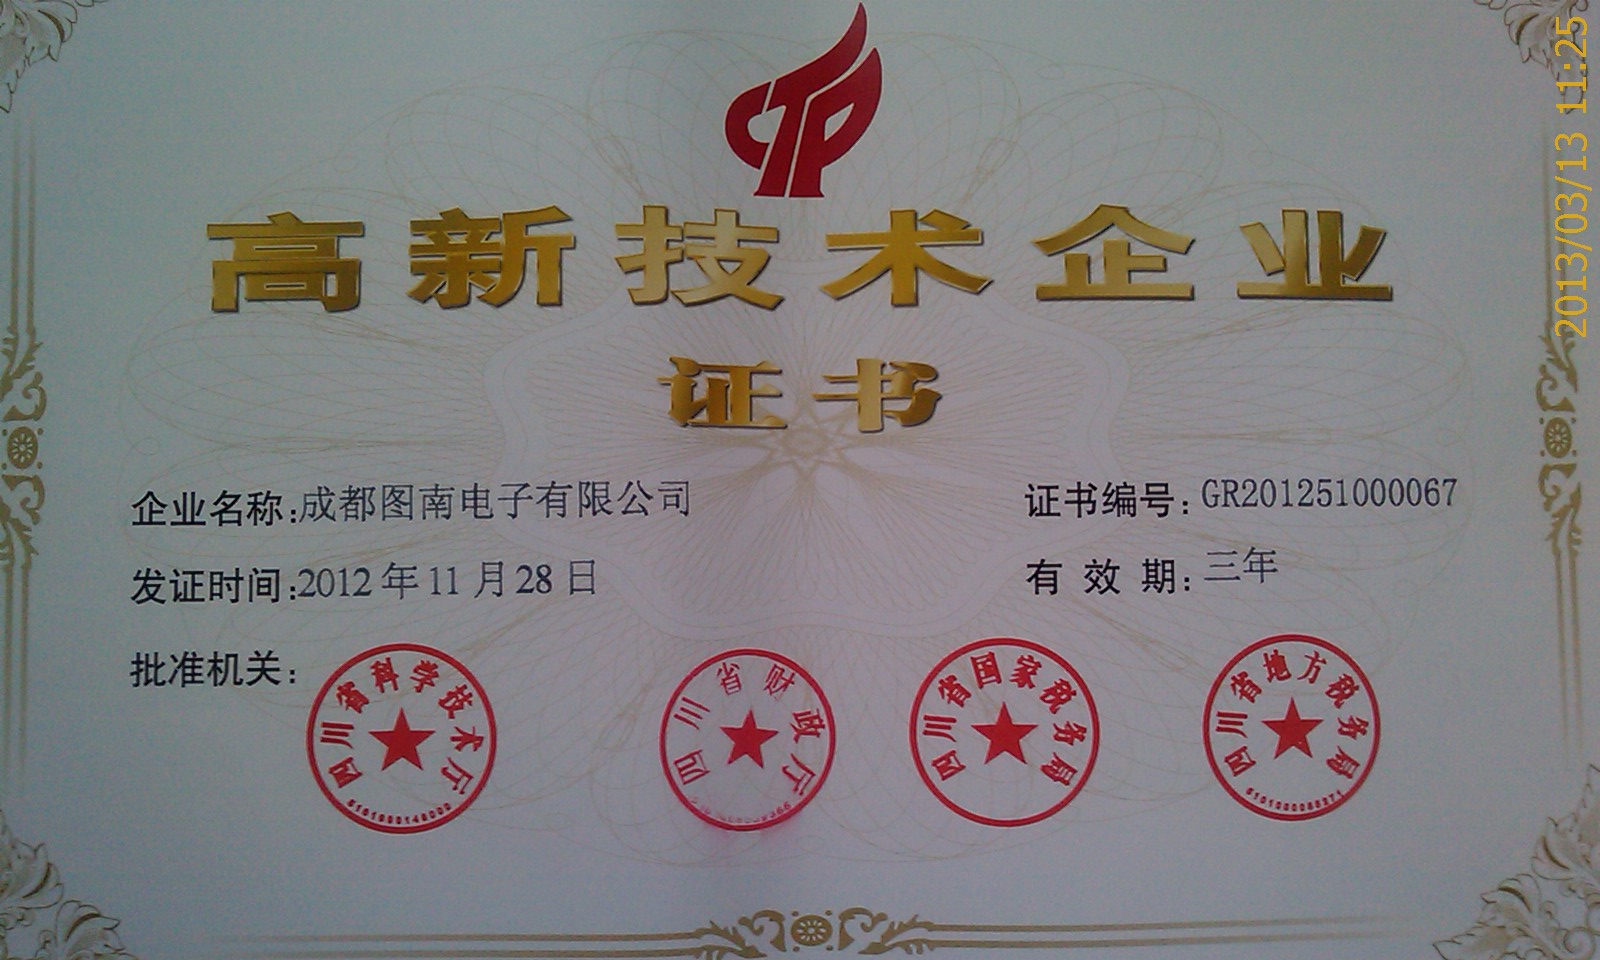 The company obtained the national high-level enterprise certificate